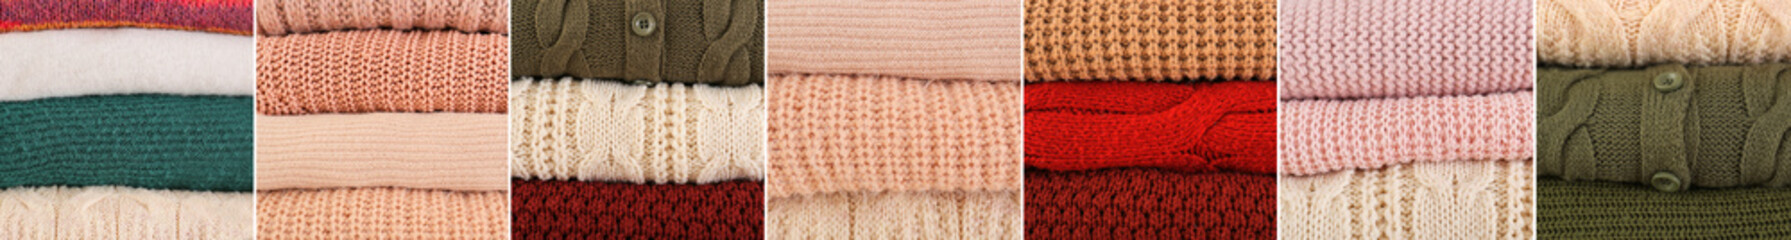 Collage of stacked warm winter clothes, closeup